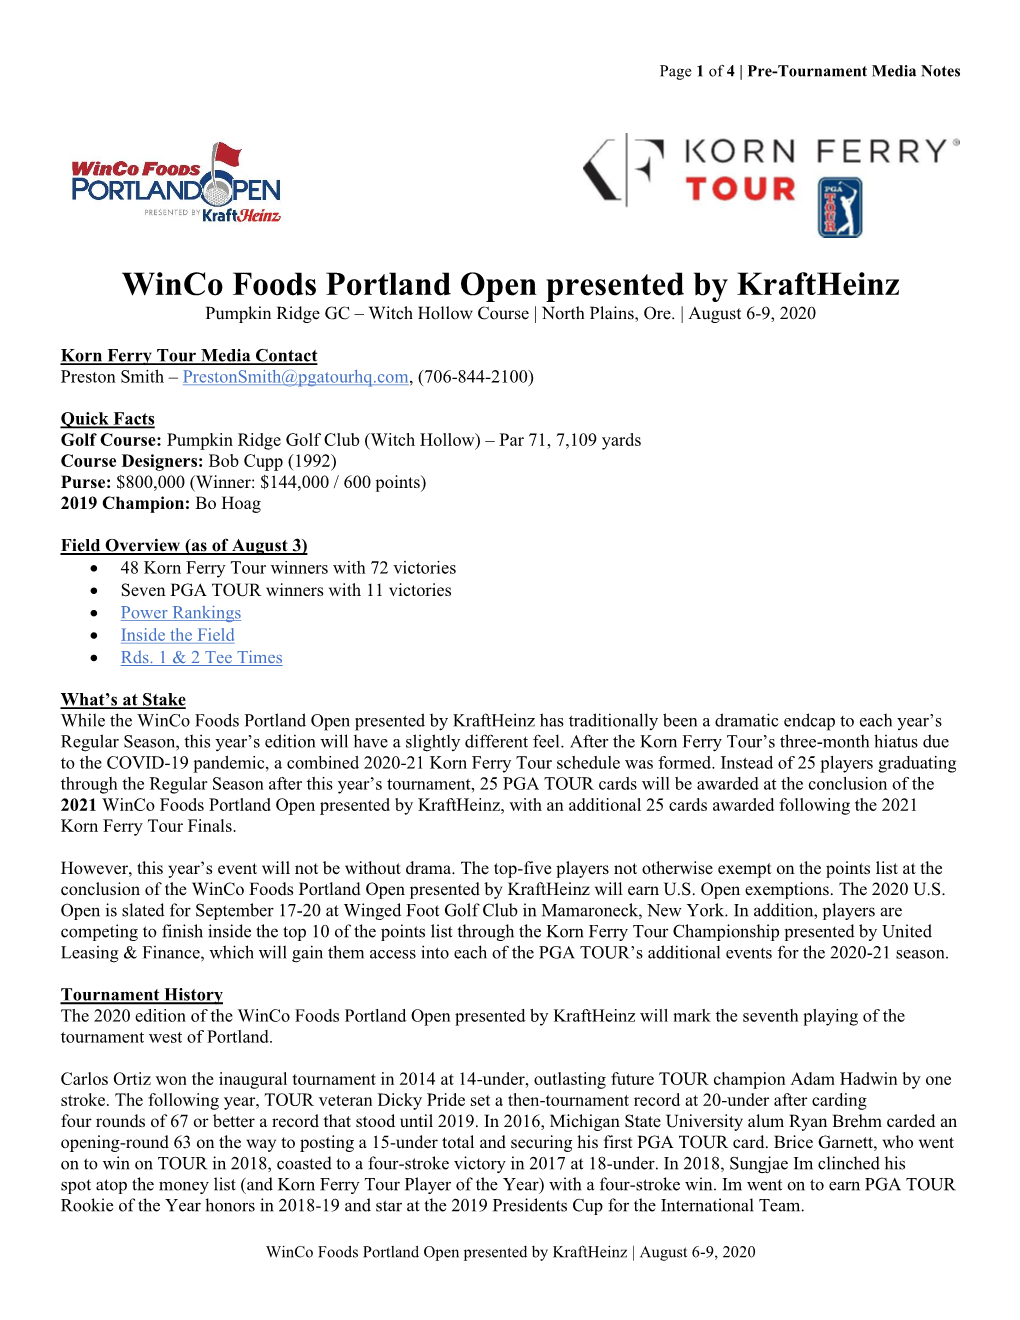 Winco Foods Portland Open Presented by Kraftheinz Pumpkin Ridge GC – Witch Hollow Course | North Plains, Ore